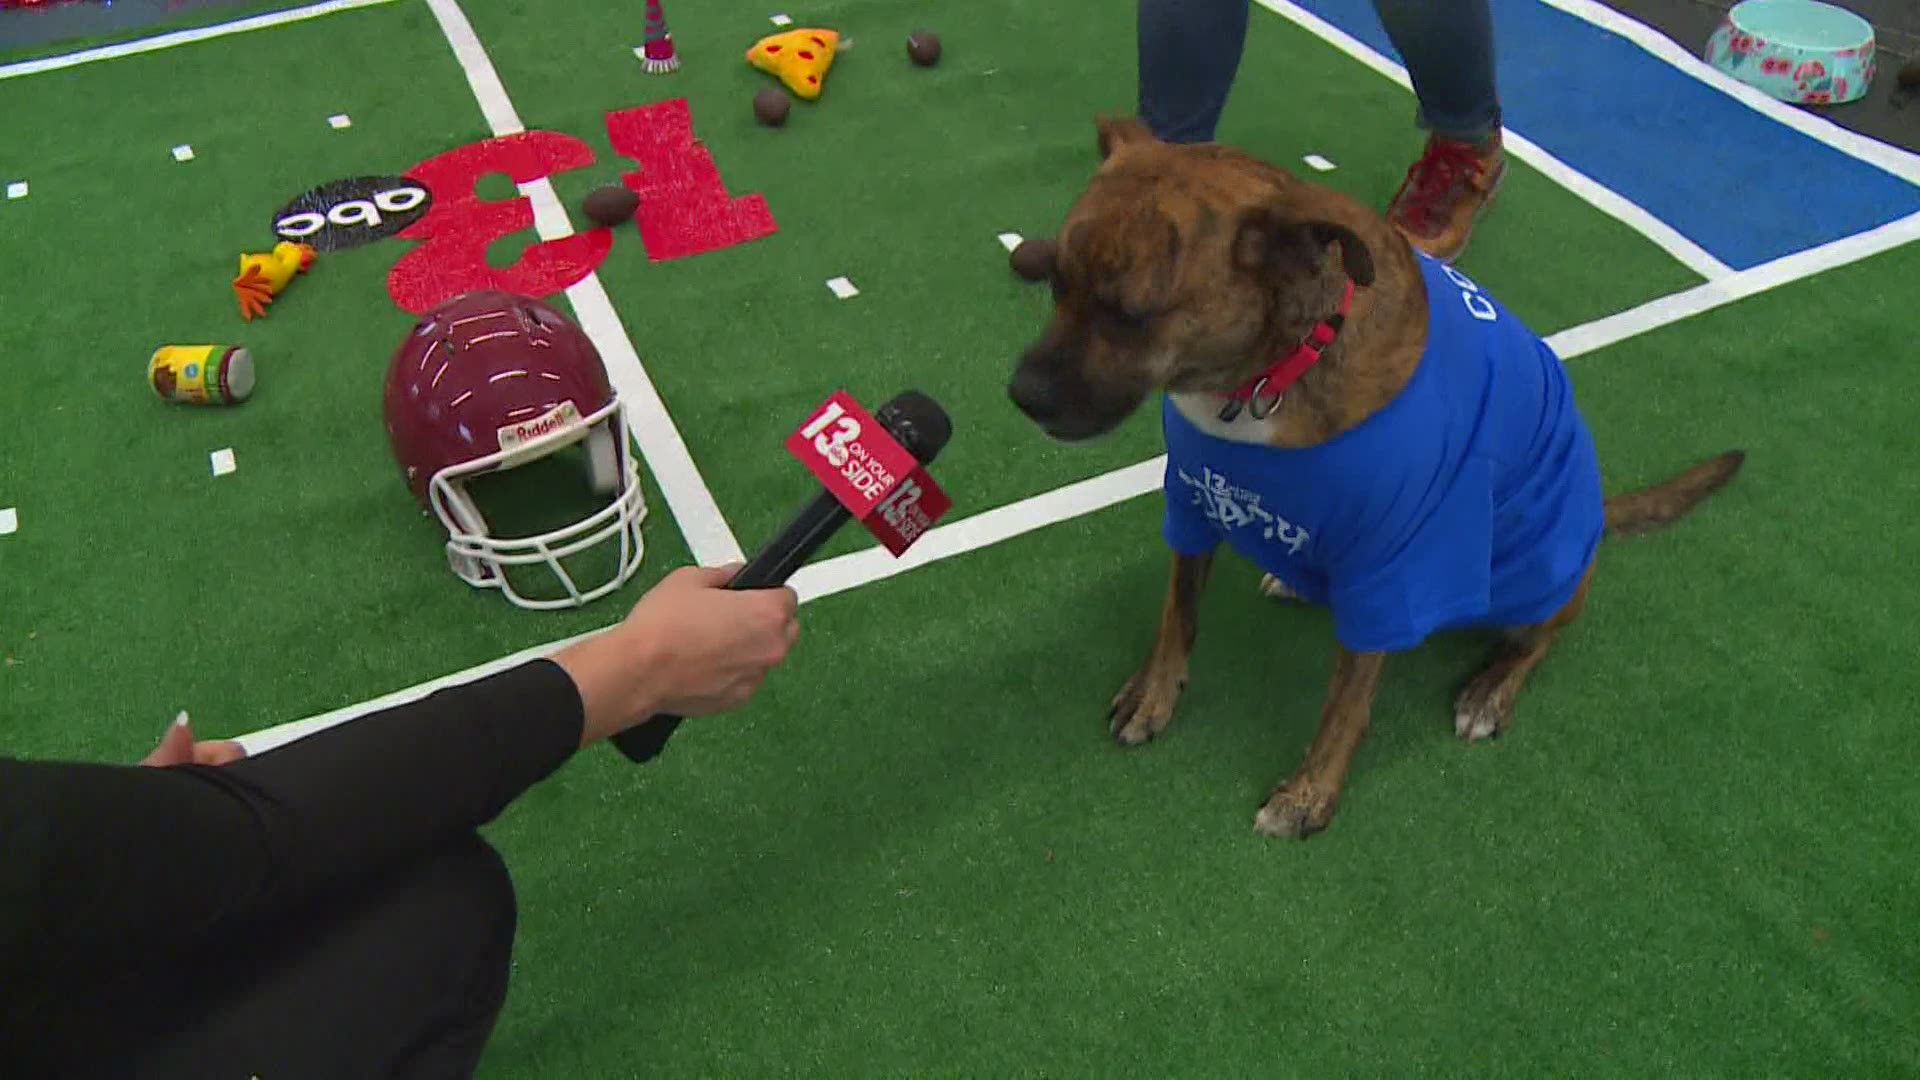 13 ON YOUR SIDE's Canine Cup is back for a third year, watch as the Kansas City Chewers take on the Tampa Bay Barkaneers.